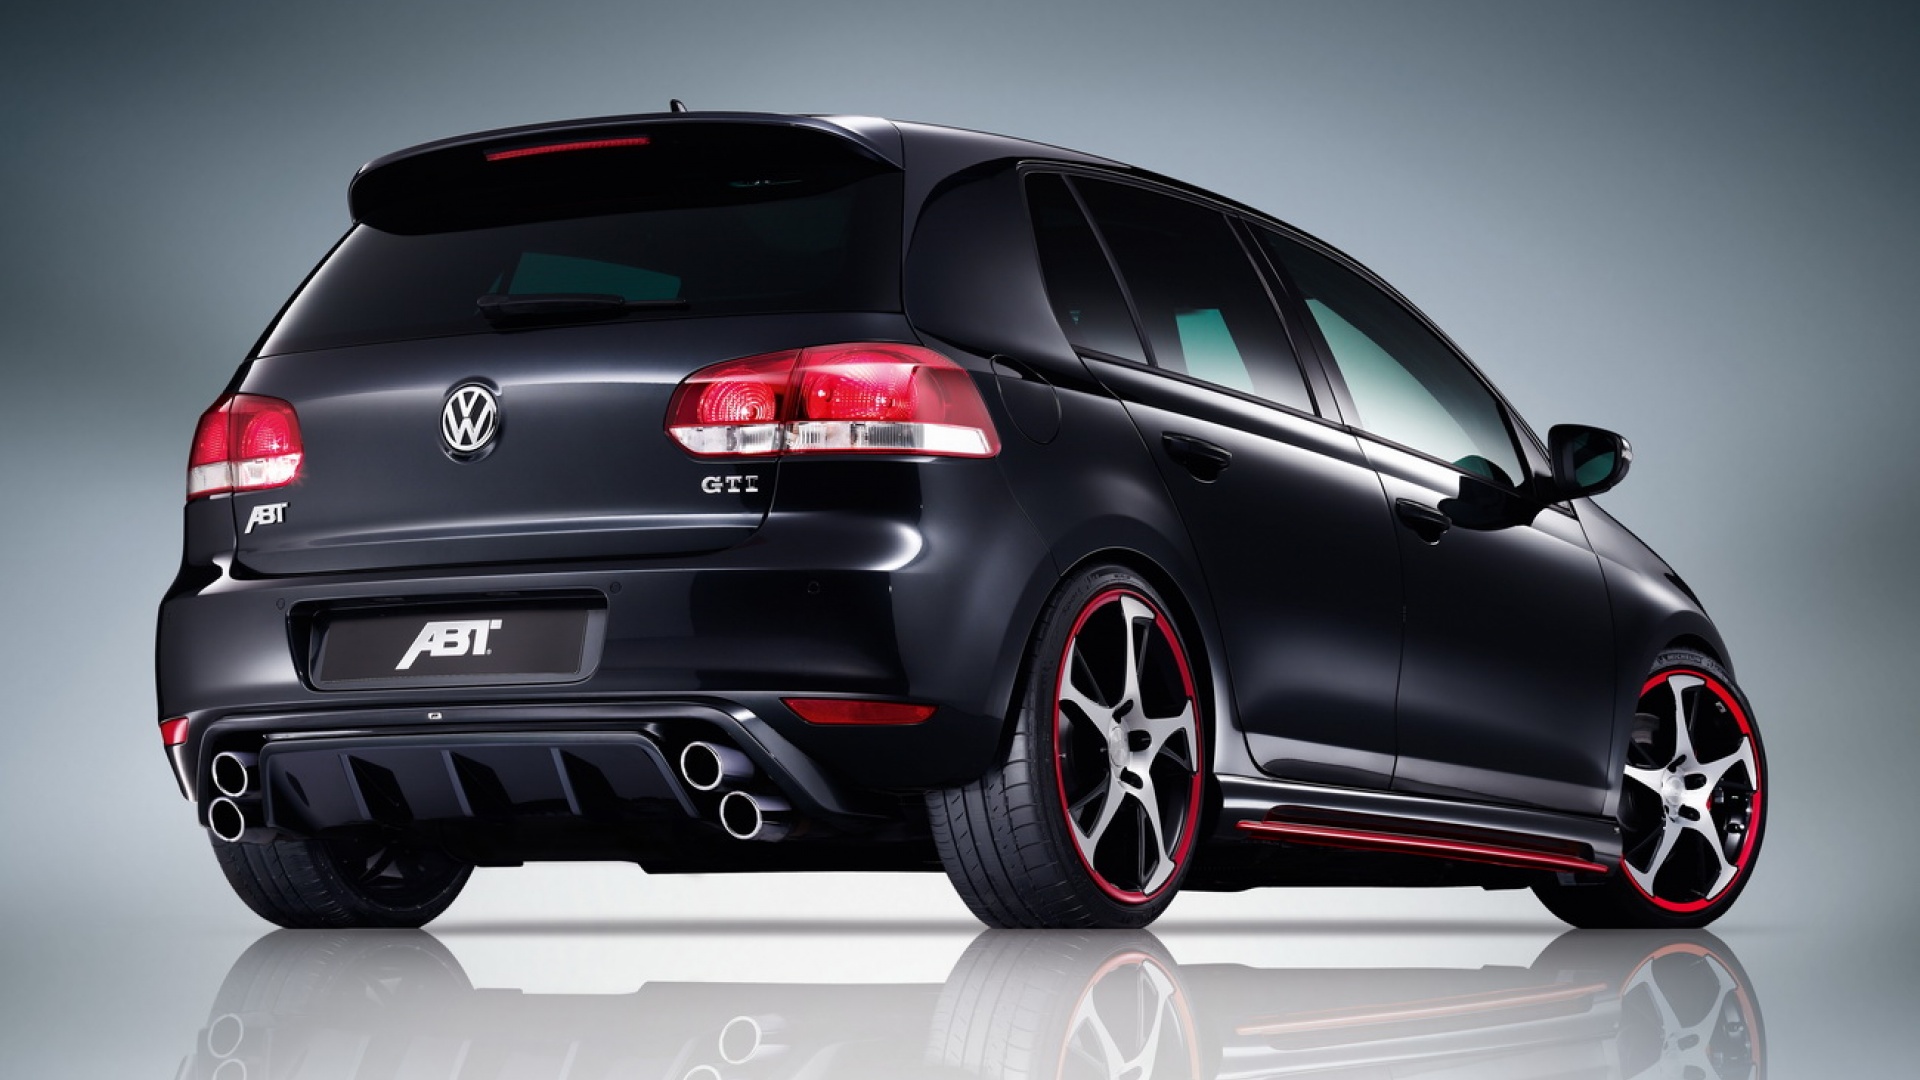 VW Golf Gti free wallpaper downloads High resolution images for free